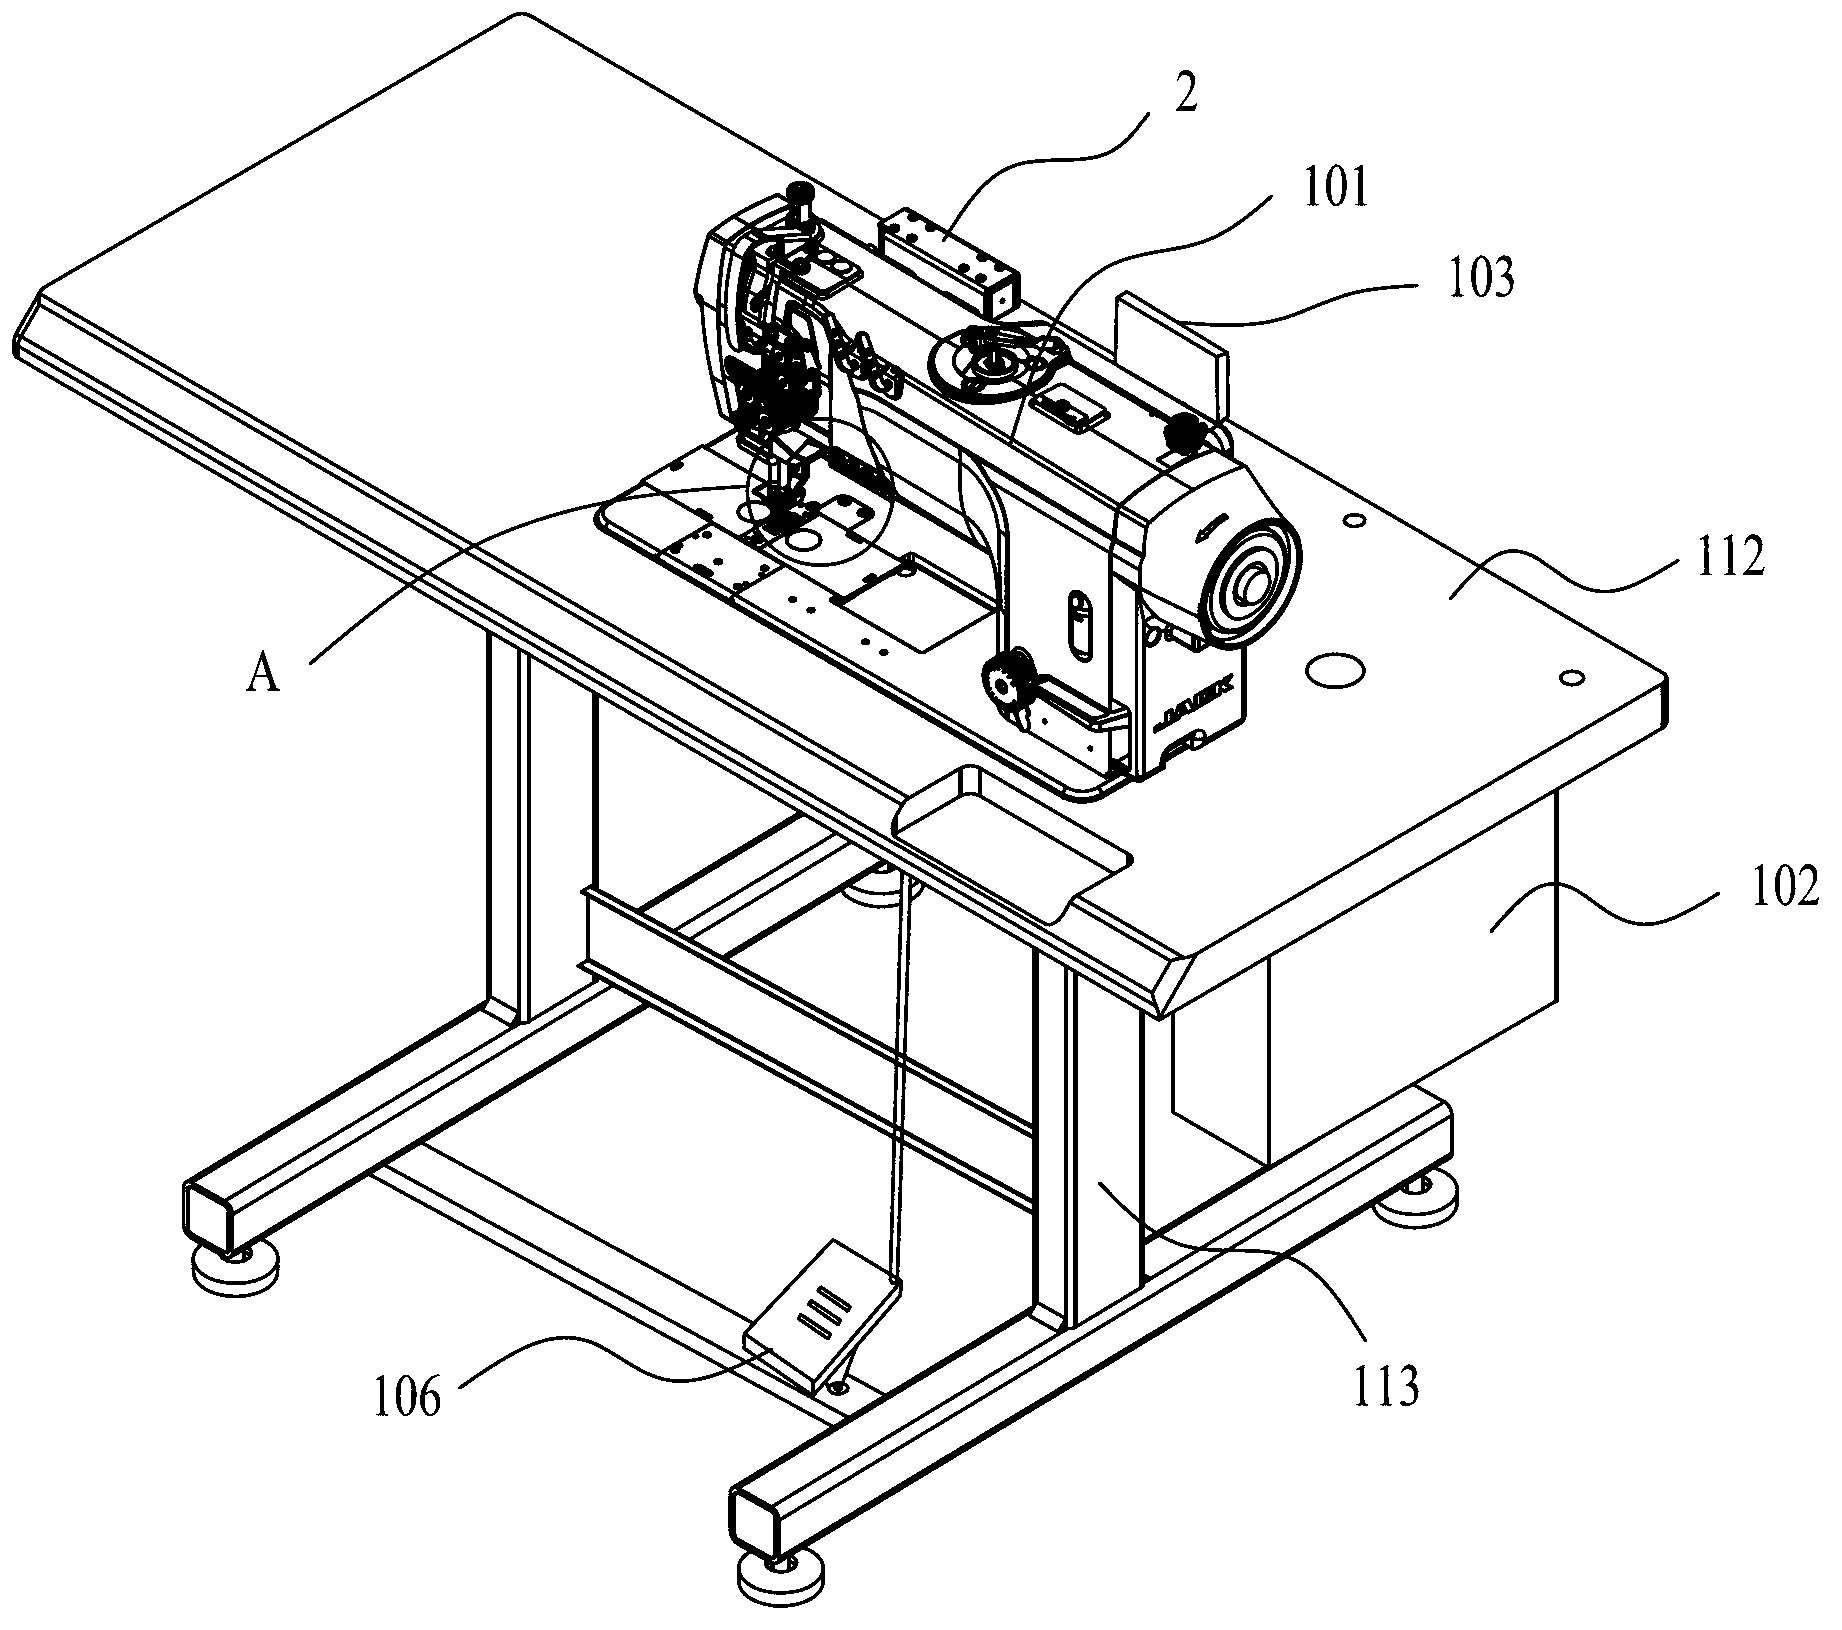 Control method for automatic separation and resetting of needle rods of double-needle machine